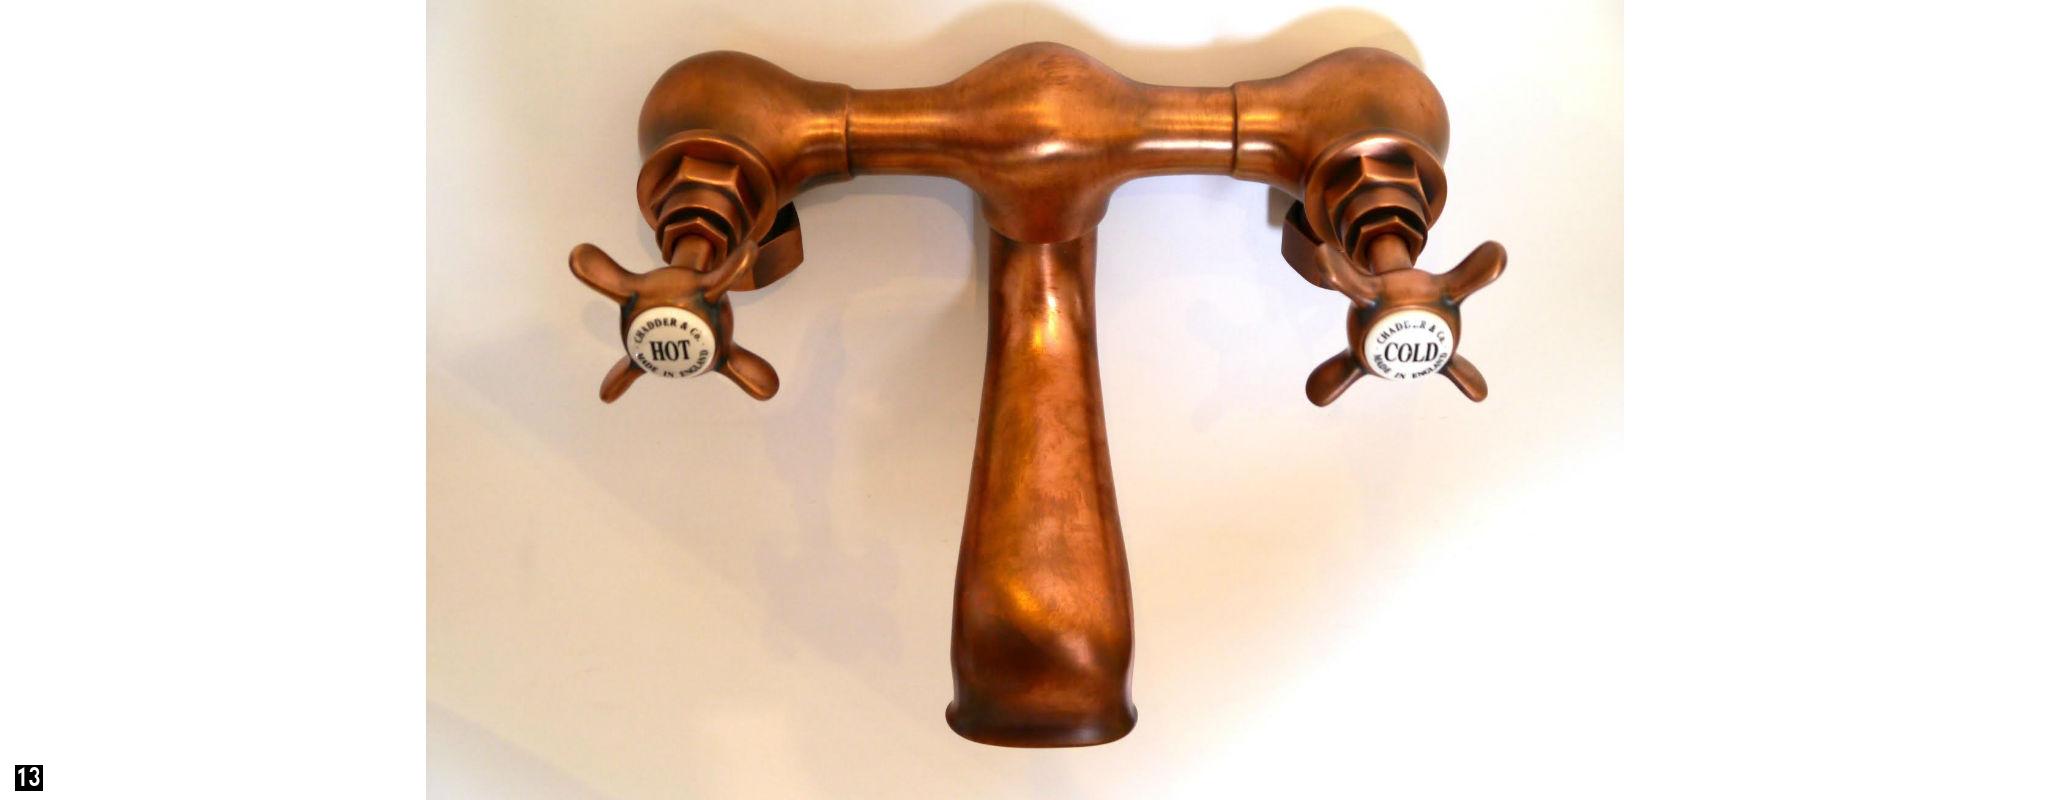 Bespoke Weathered Copper Bath Taps and Bath Mixers